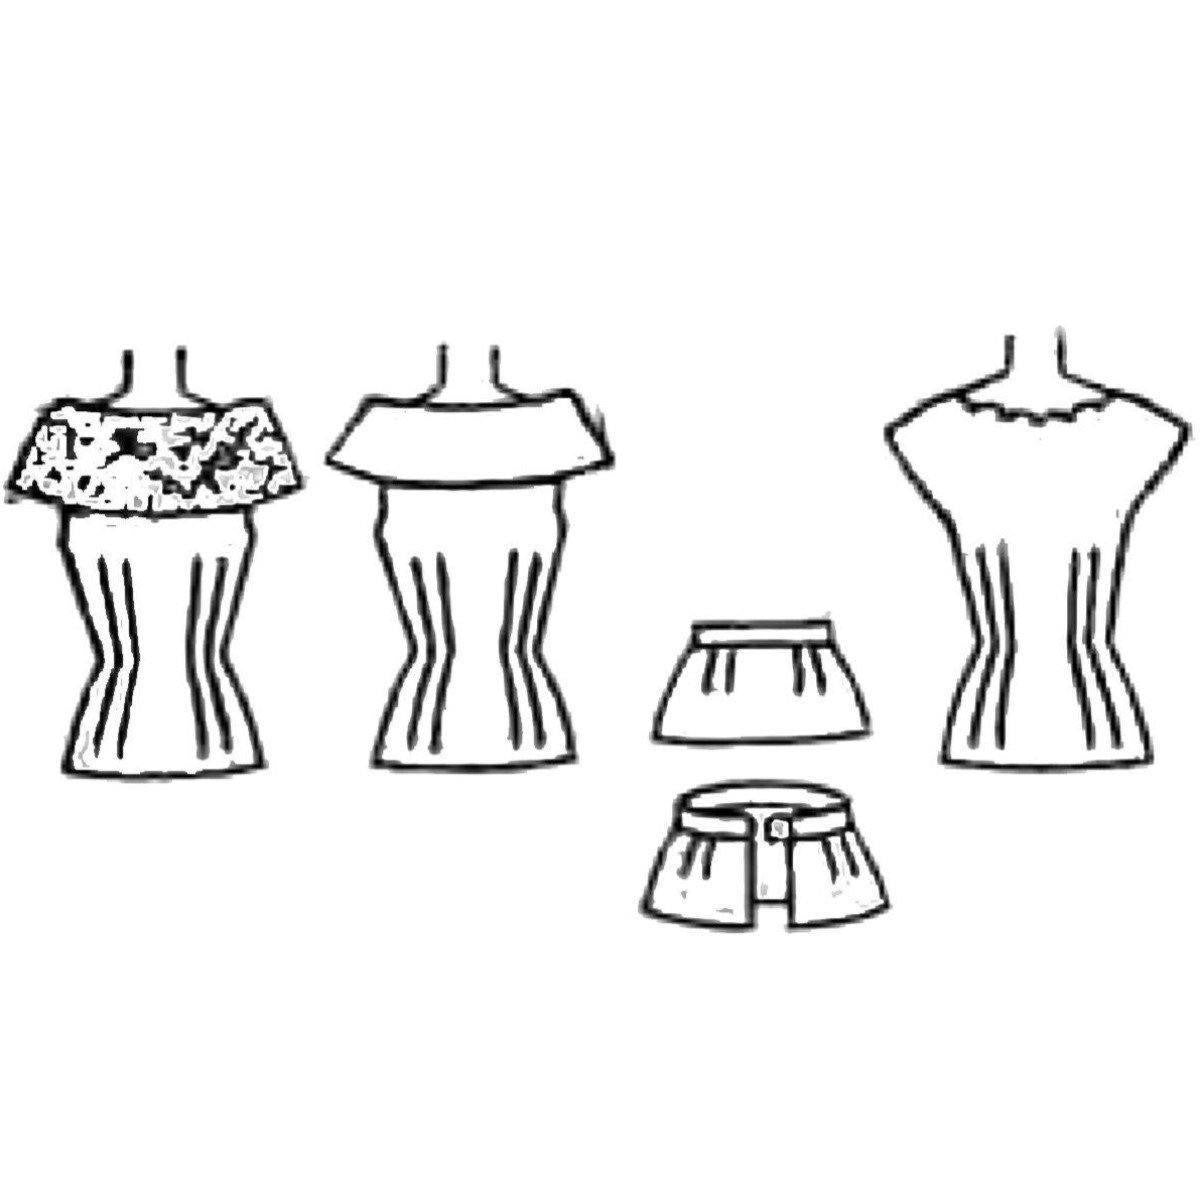 Line drawing of tops.